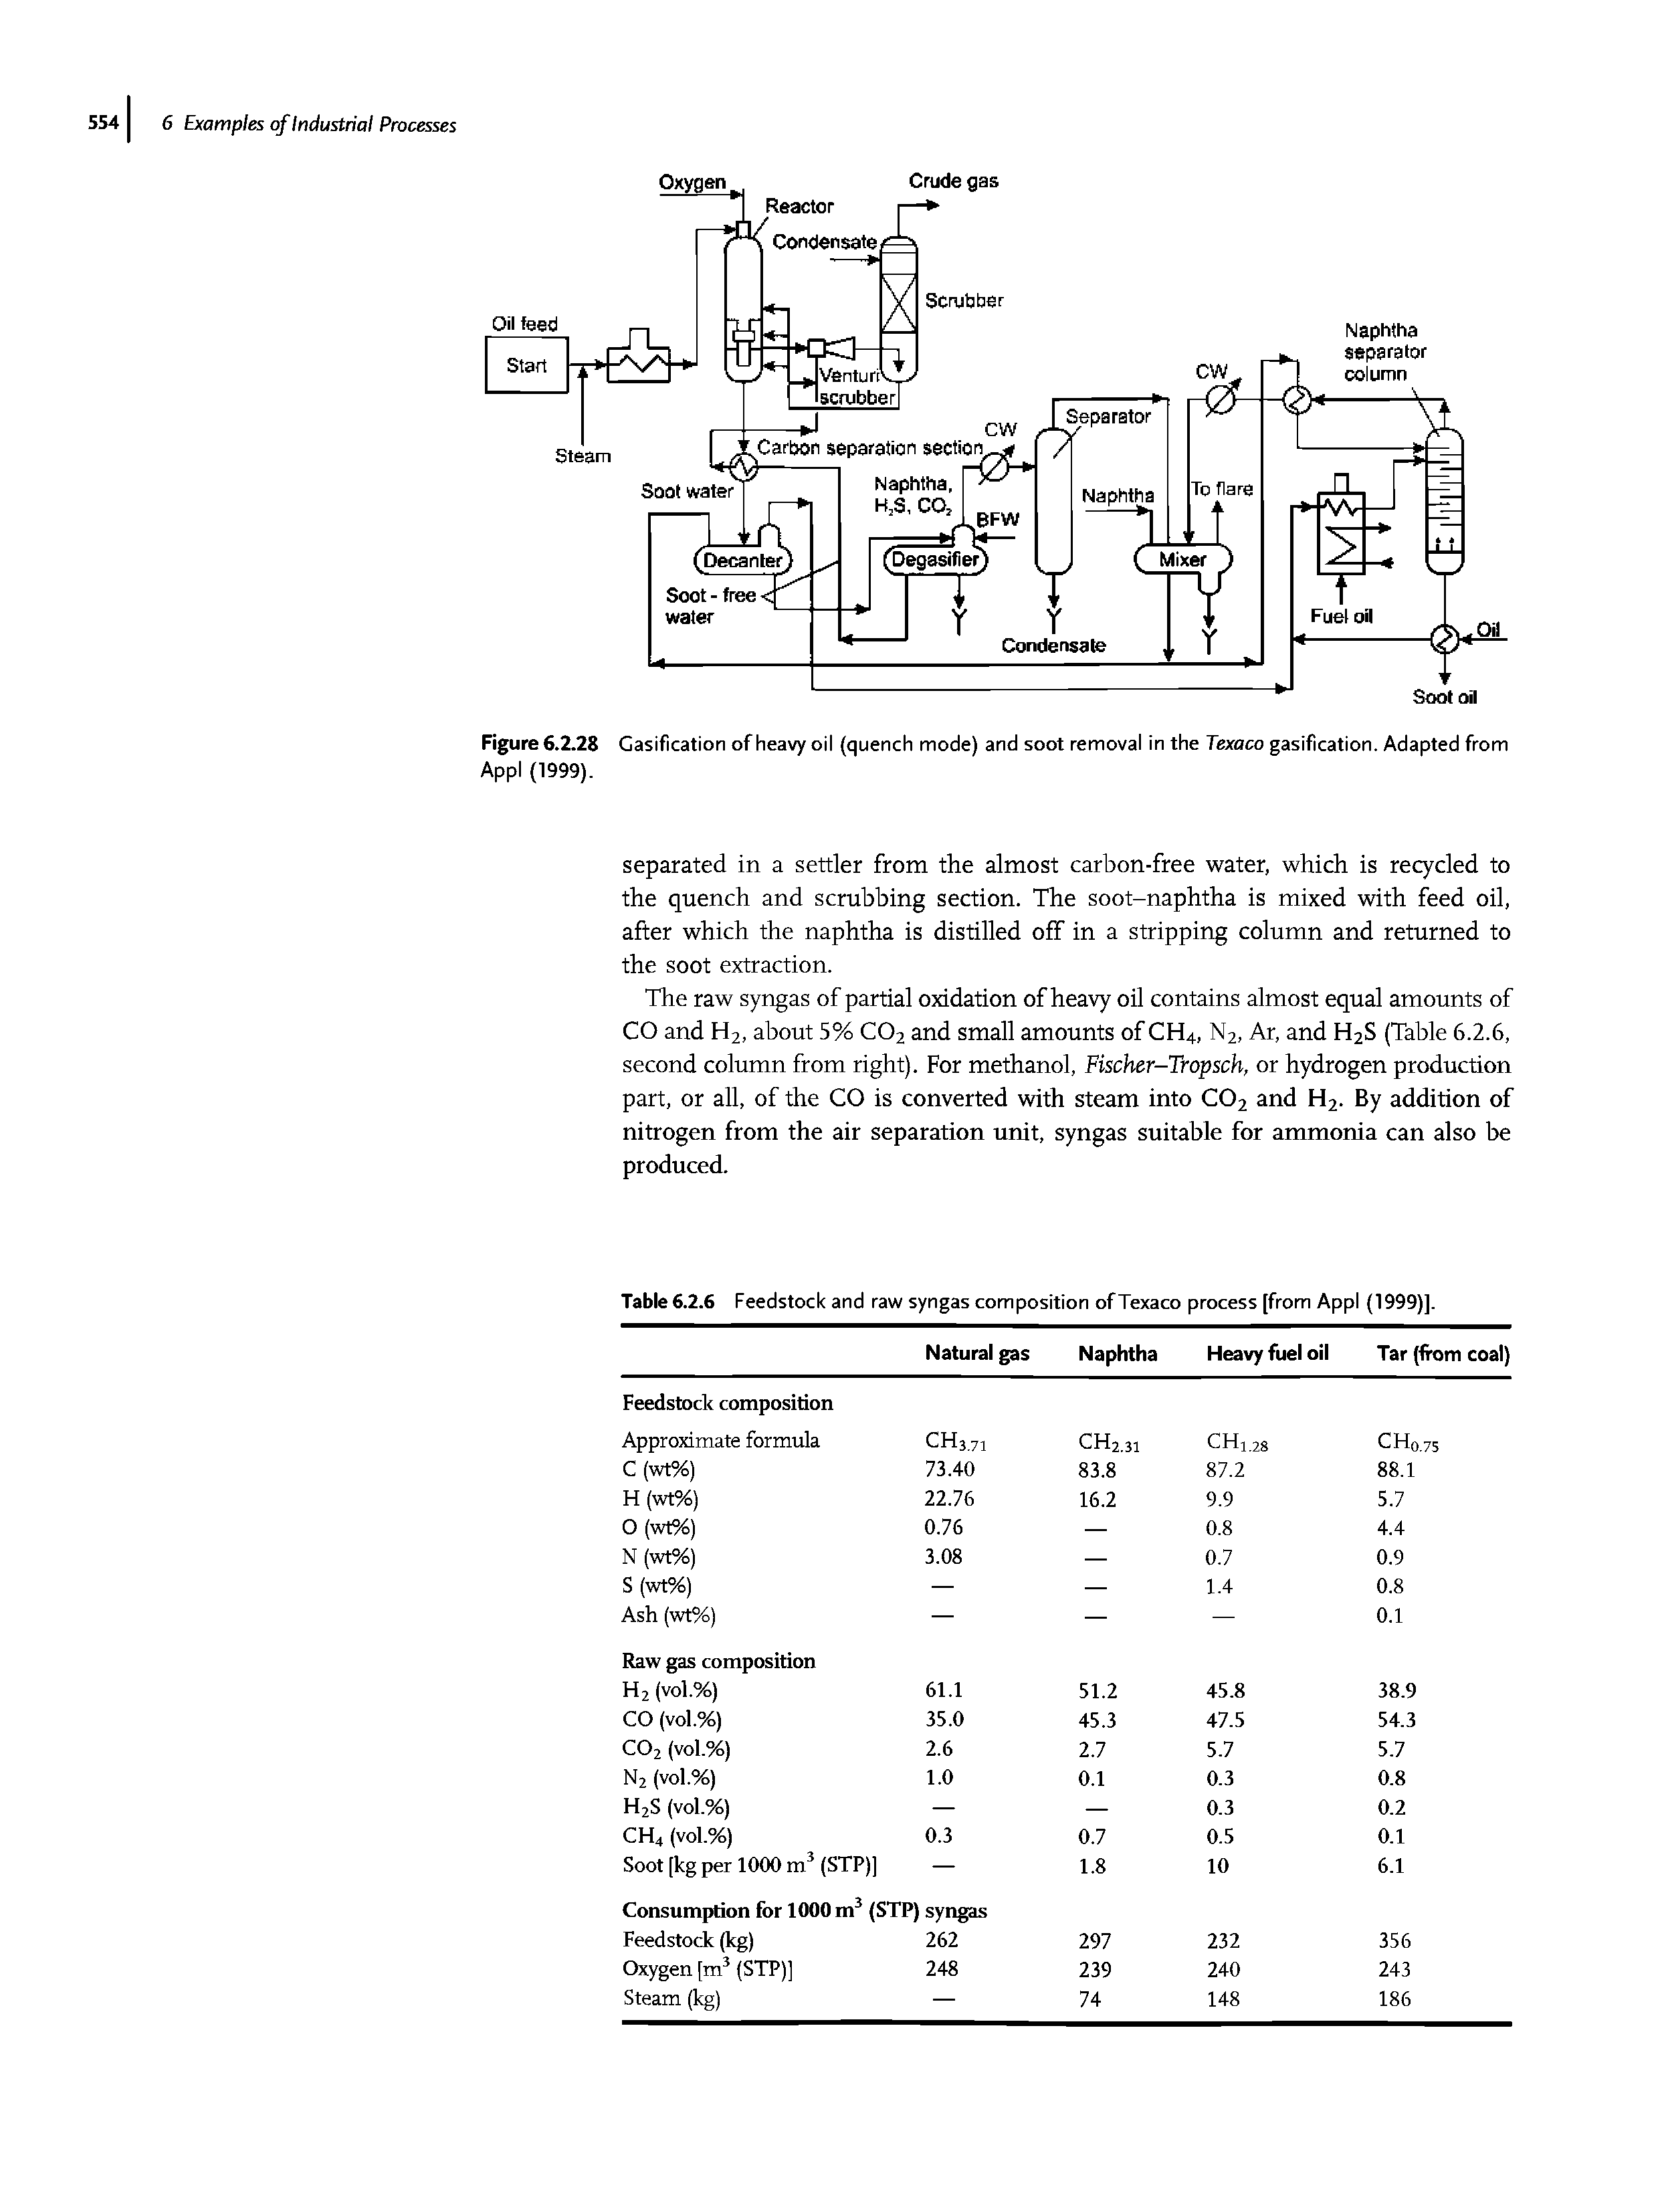 Figure 6.2.28 Gasification of heavy oil (quench mode) and soot removal in the Texaco gasification. Adapted from AppI (1999).